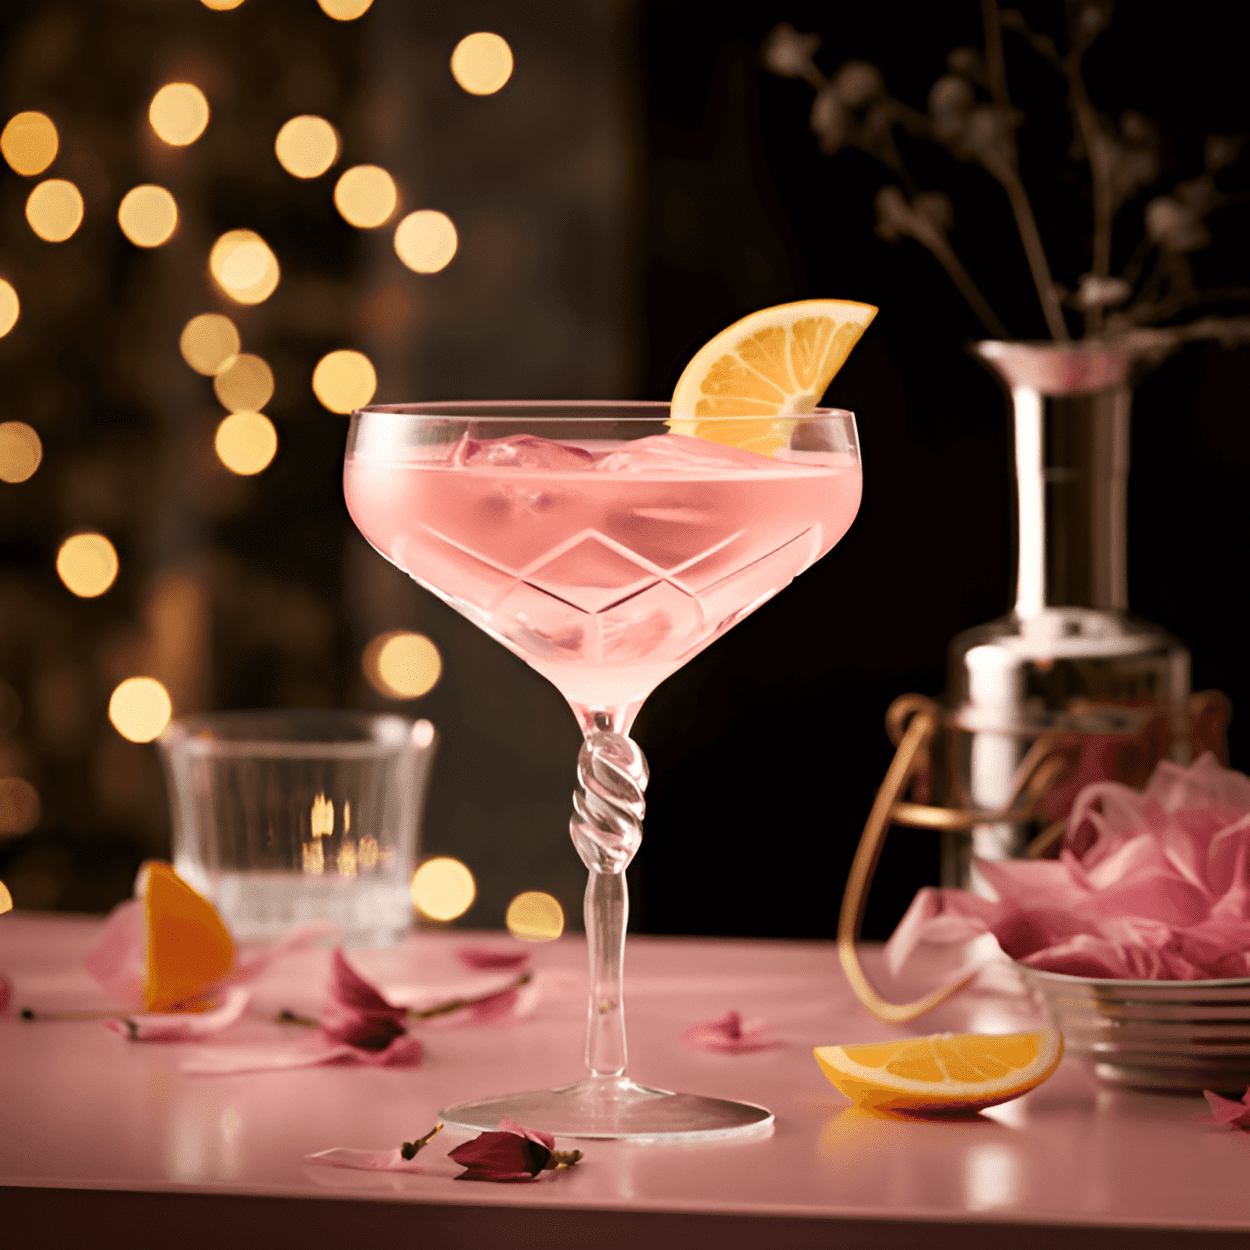 Pink Gin Cocktail Recipe - Pink Gin has a complex taste that is both bitter and sweet, with a strong herbal and botanical flavor from the gin and bitters. The cocktail is also slightly spicy, with a hint of citrus and a warm, lingering finish.